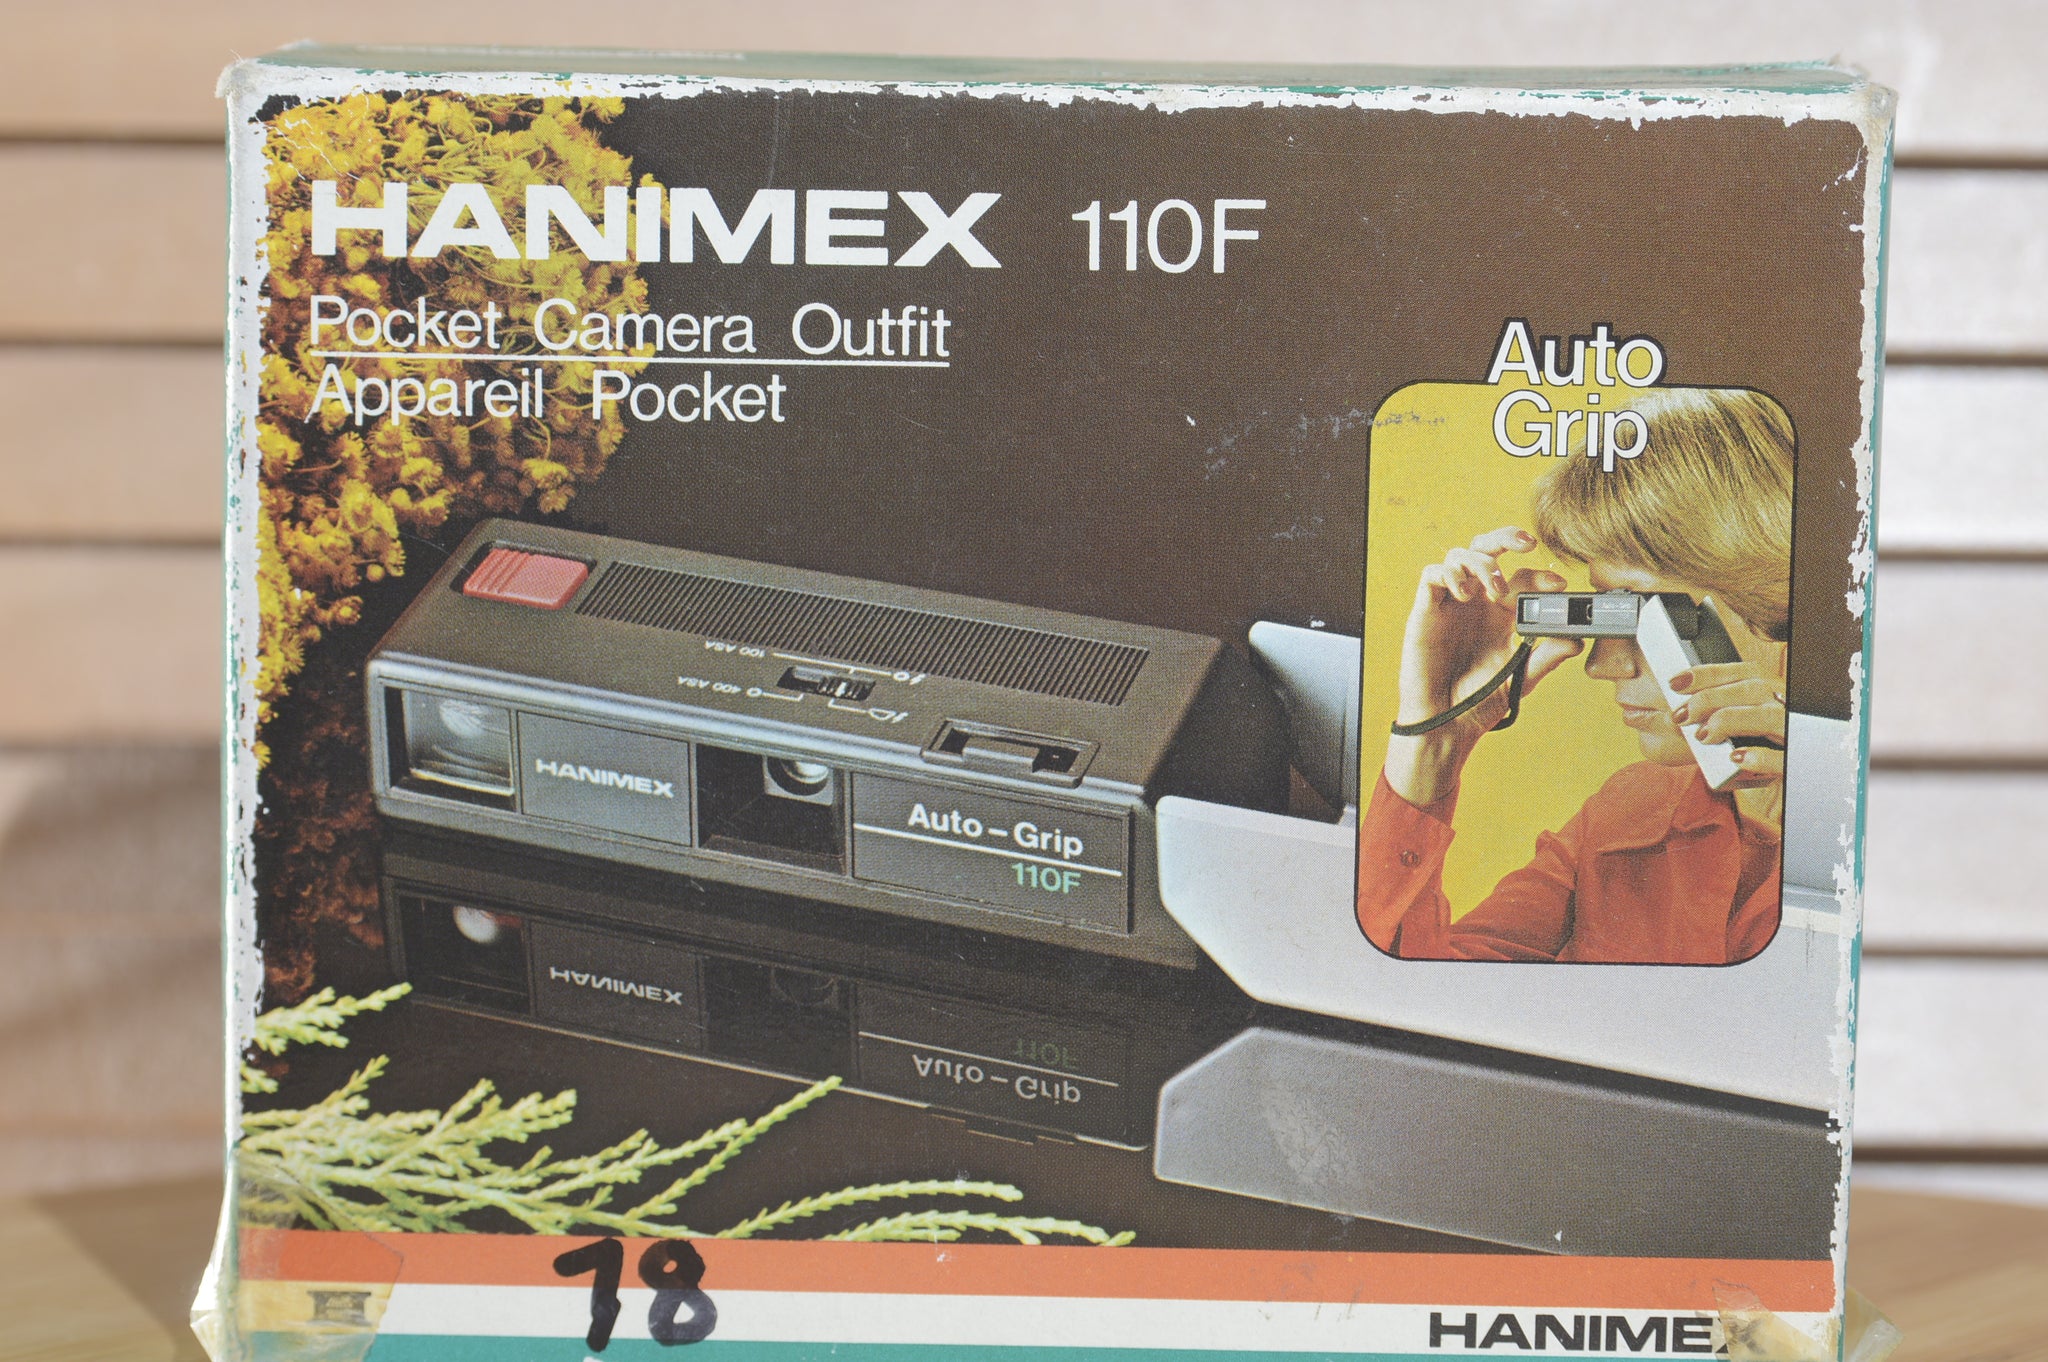 Boxed Hanimex 110F Pocket Camera Outfit. Built in flash for low light conditions. great way to get into 110mm photography! - RewindCameras quality vintage cameras, fully tested and serviced